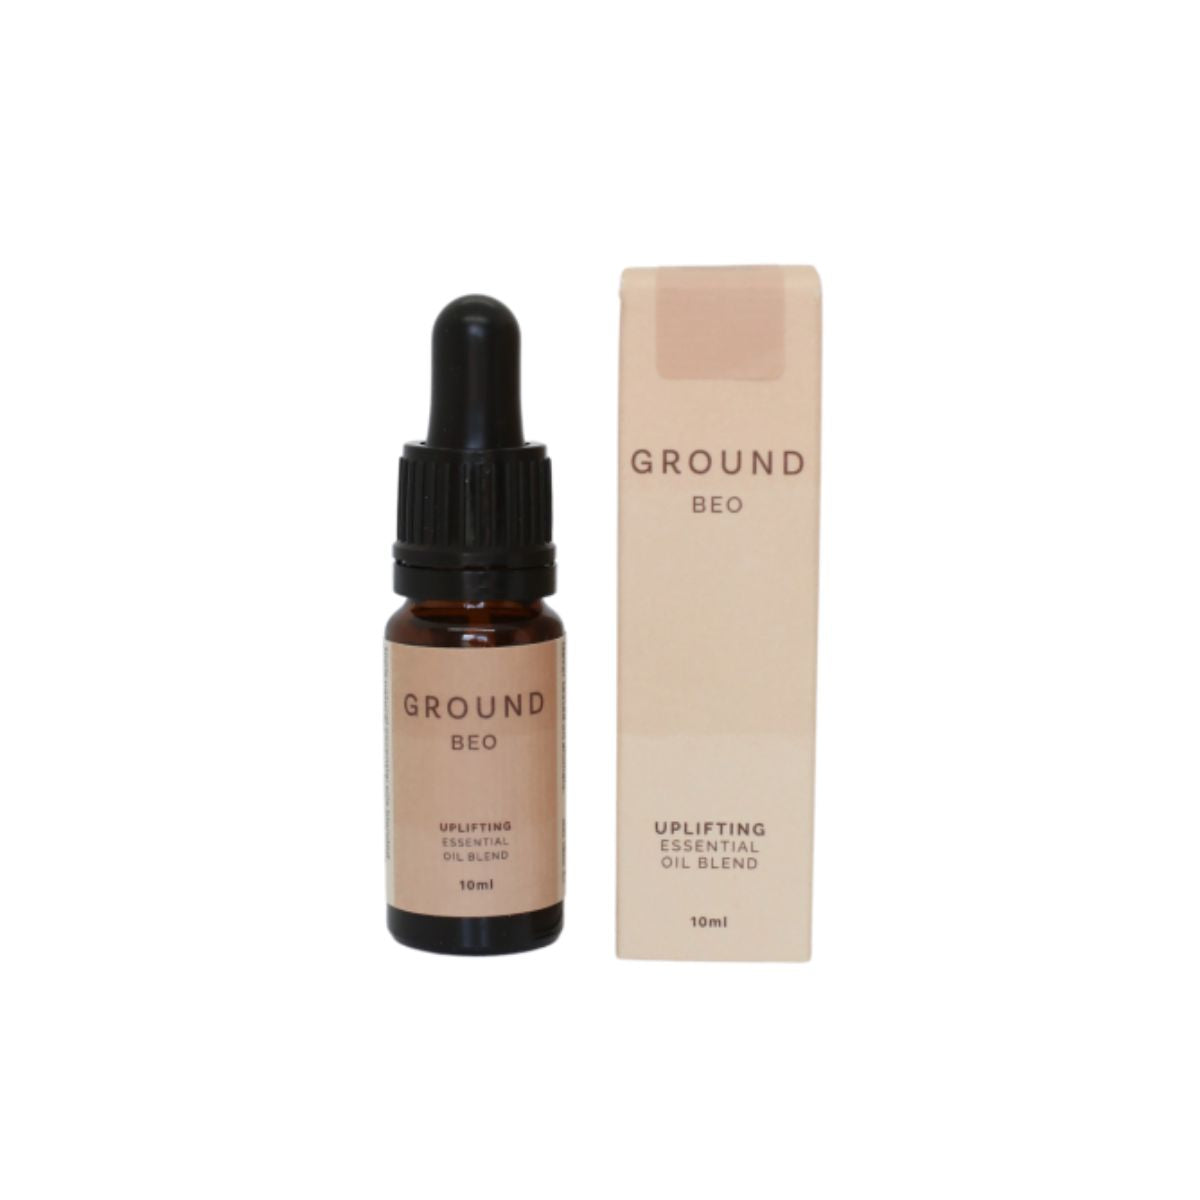 GROUND BEO Uplifting Essential Oil Blend